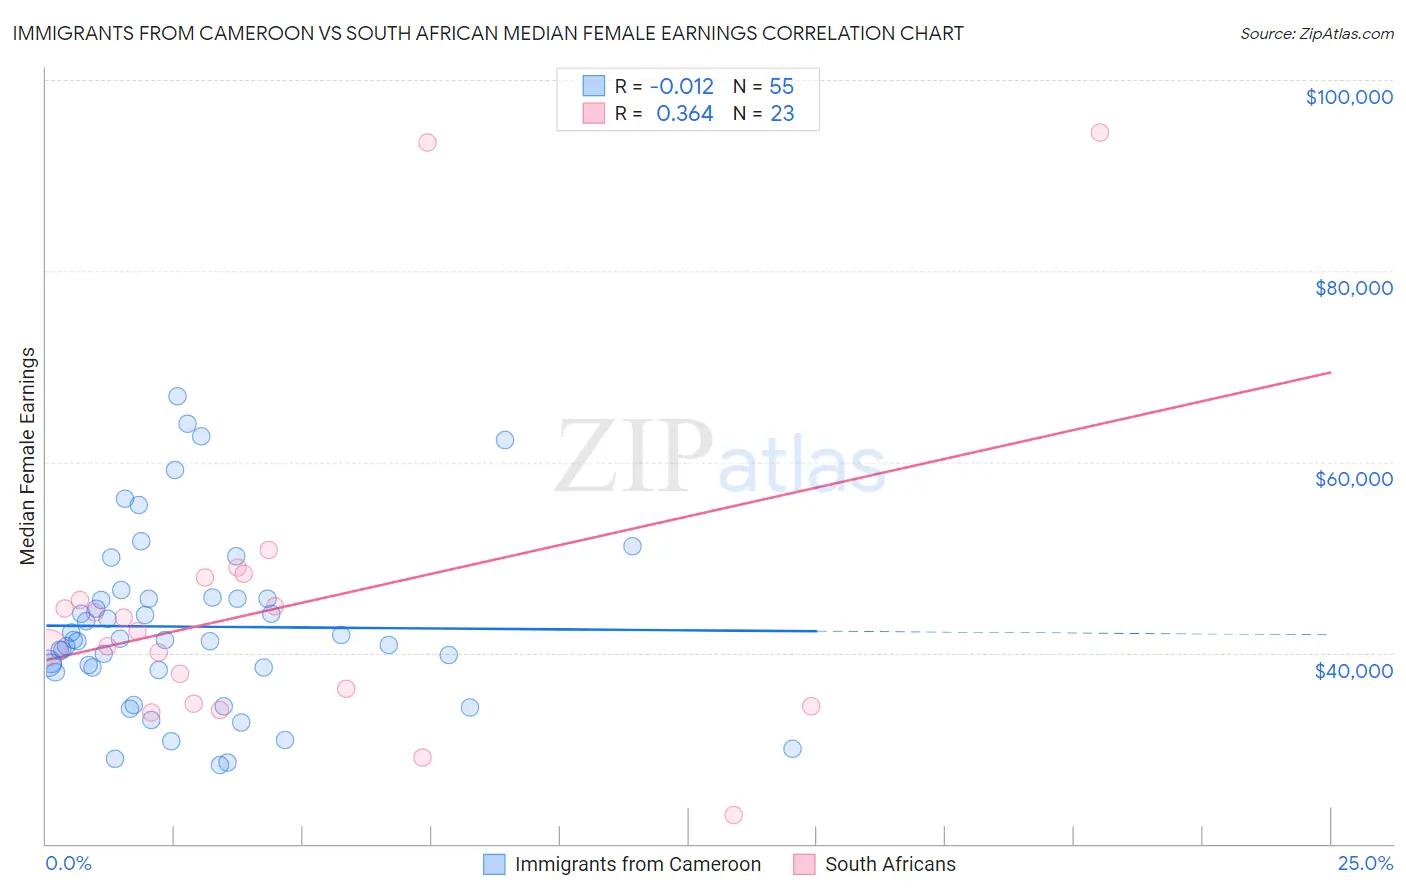 Immigrants from Cameroon vs South African Median Female Earnings